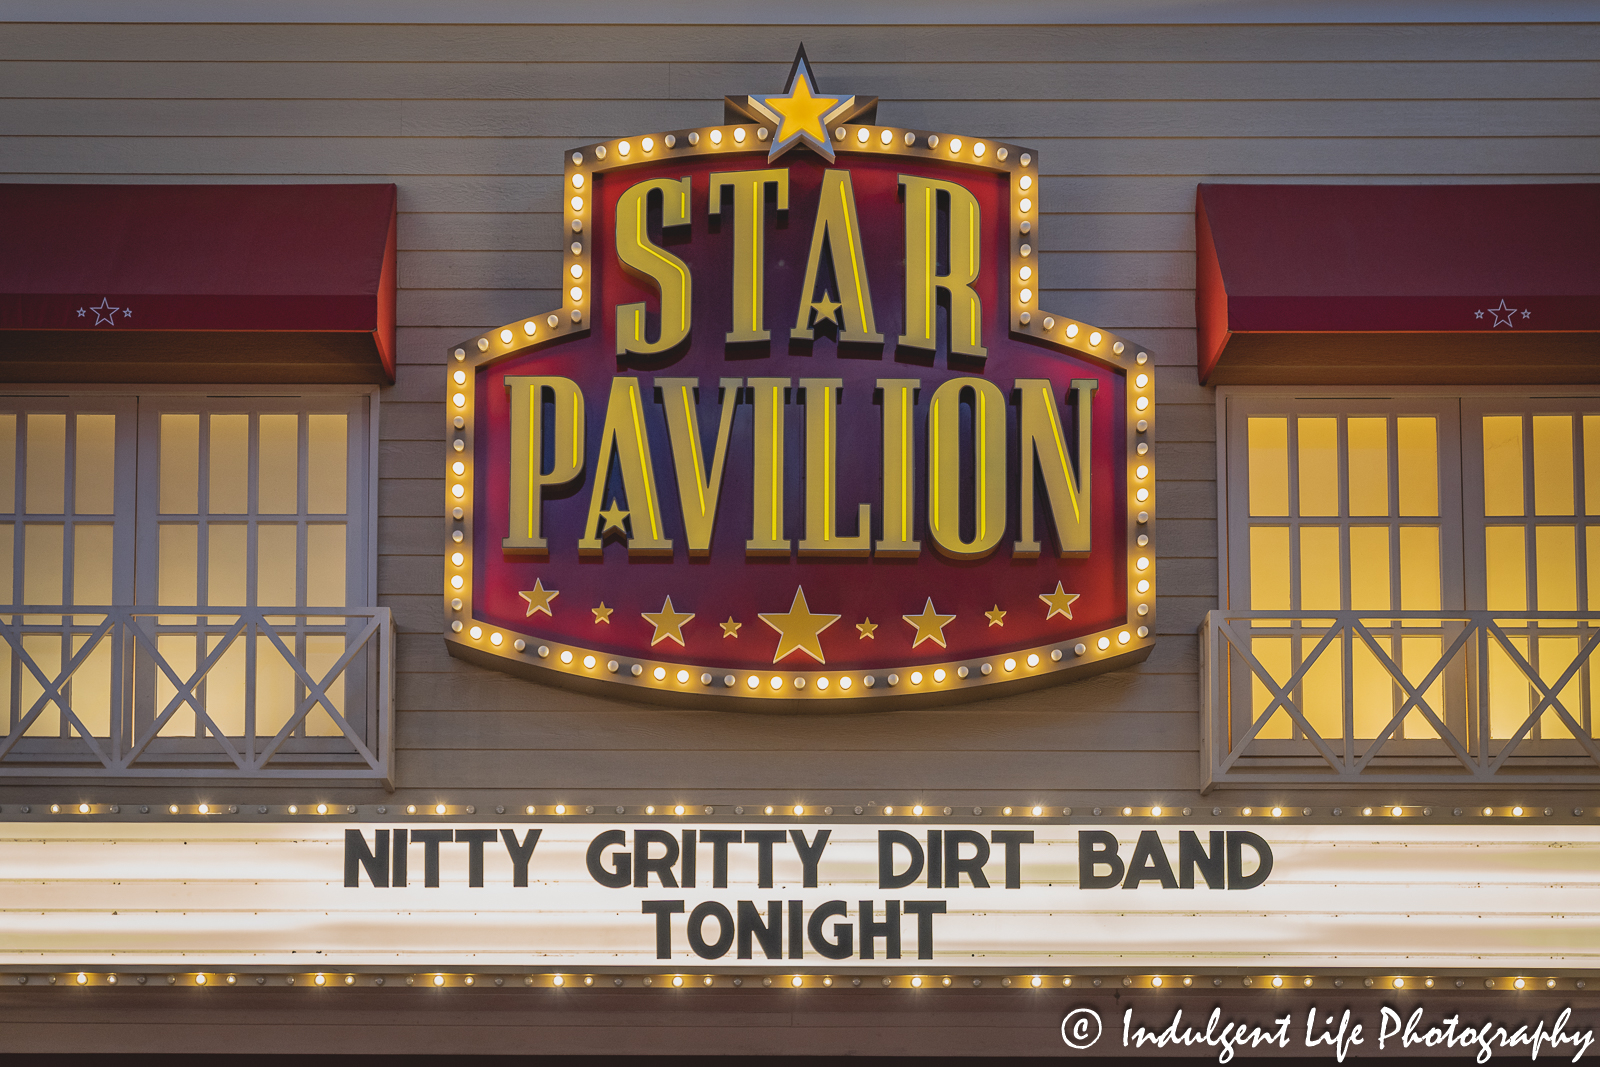 Star Pavilion marquee at Ameristar Casino in Kansas City, MO featuring Nitty Gritty Dirt Band on July 8, 2023.